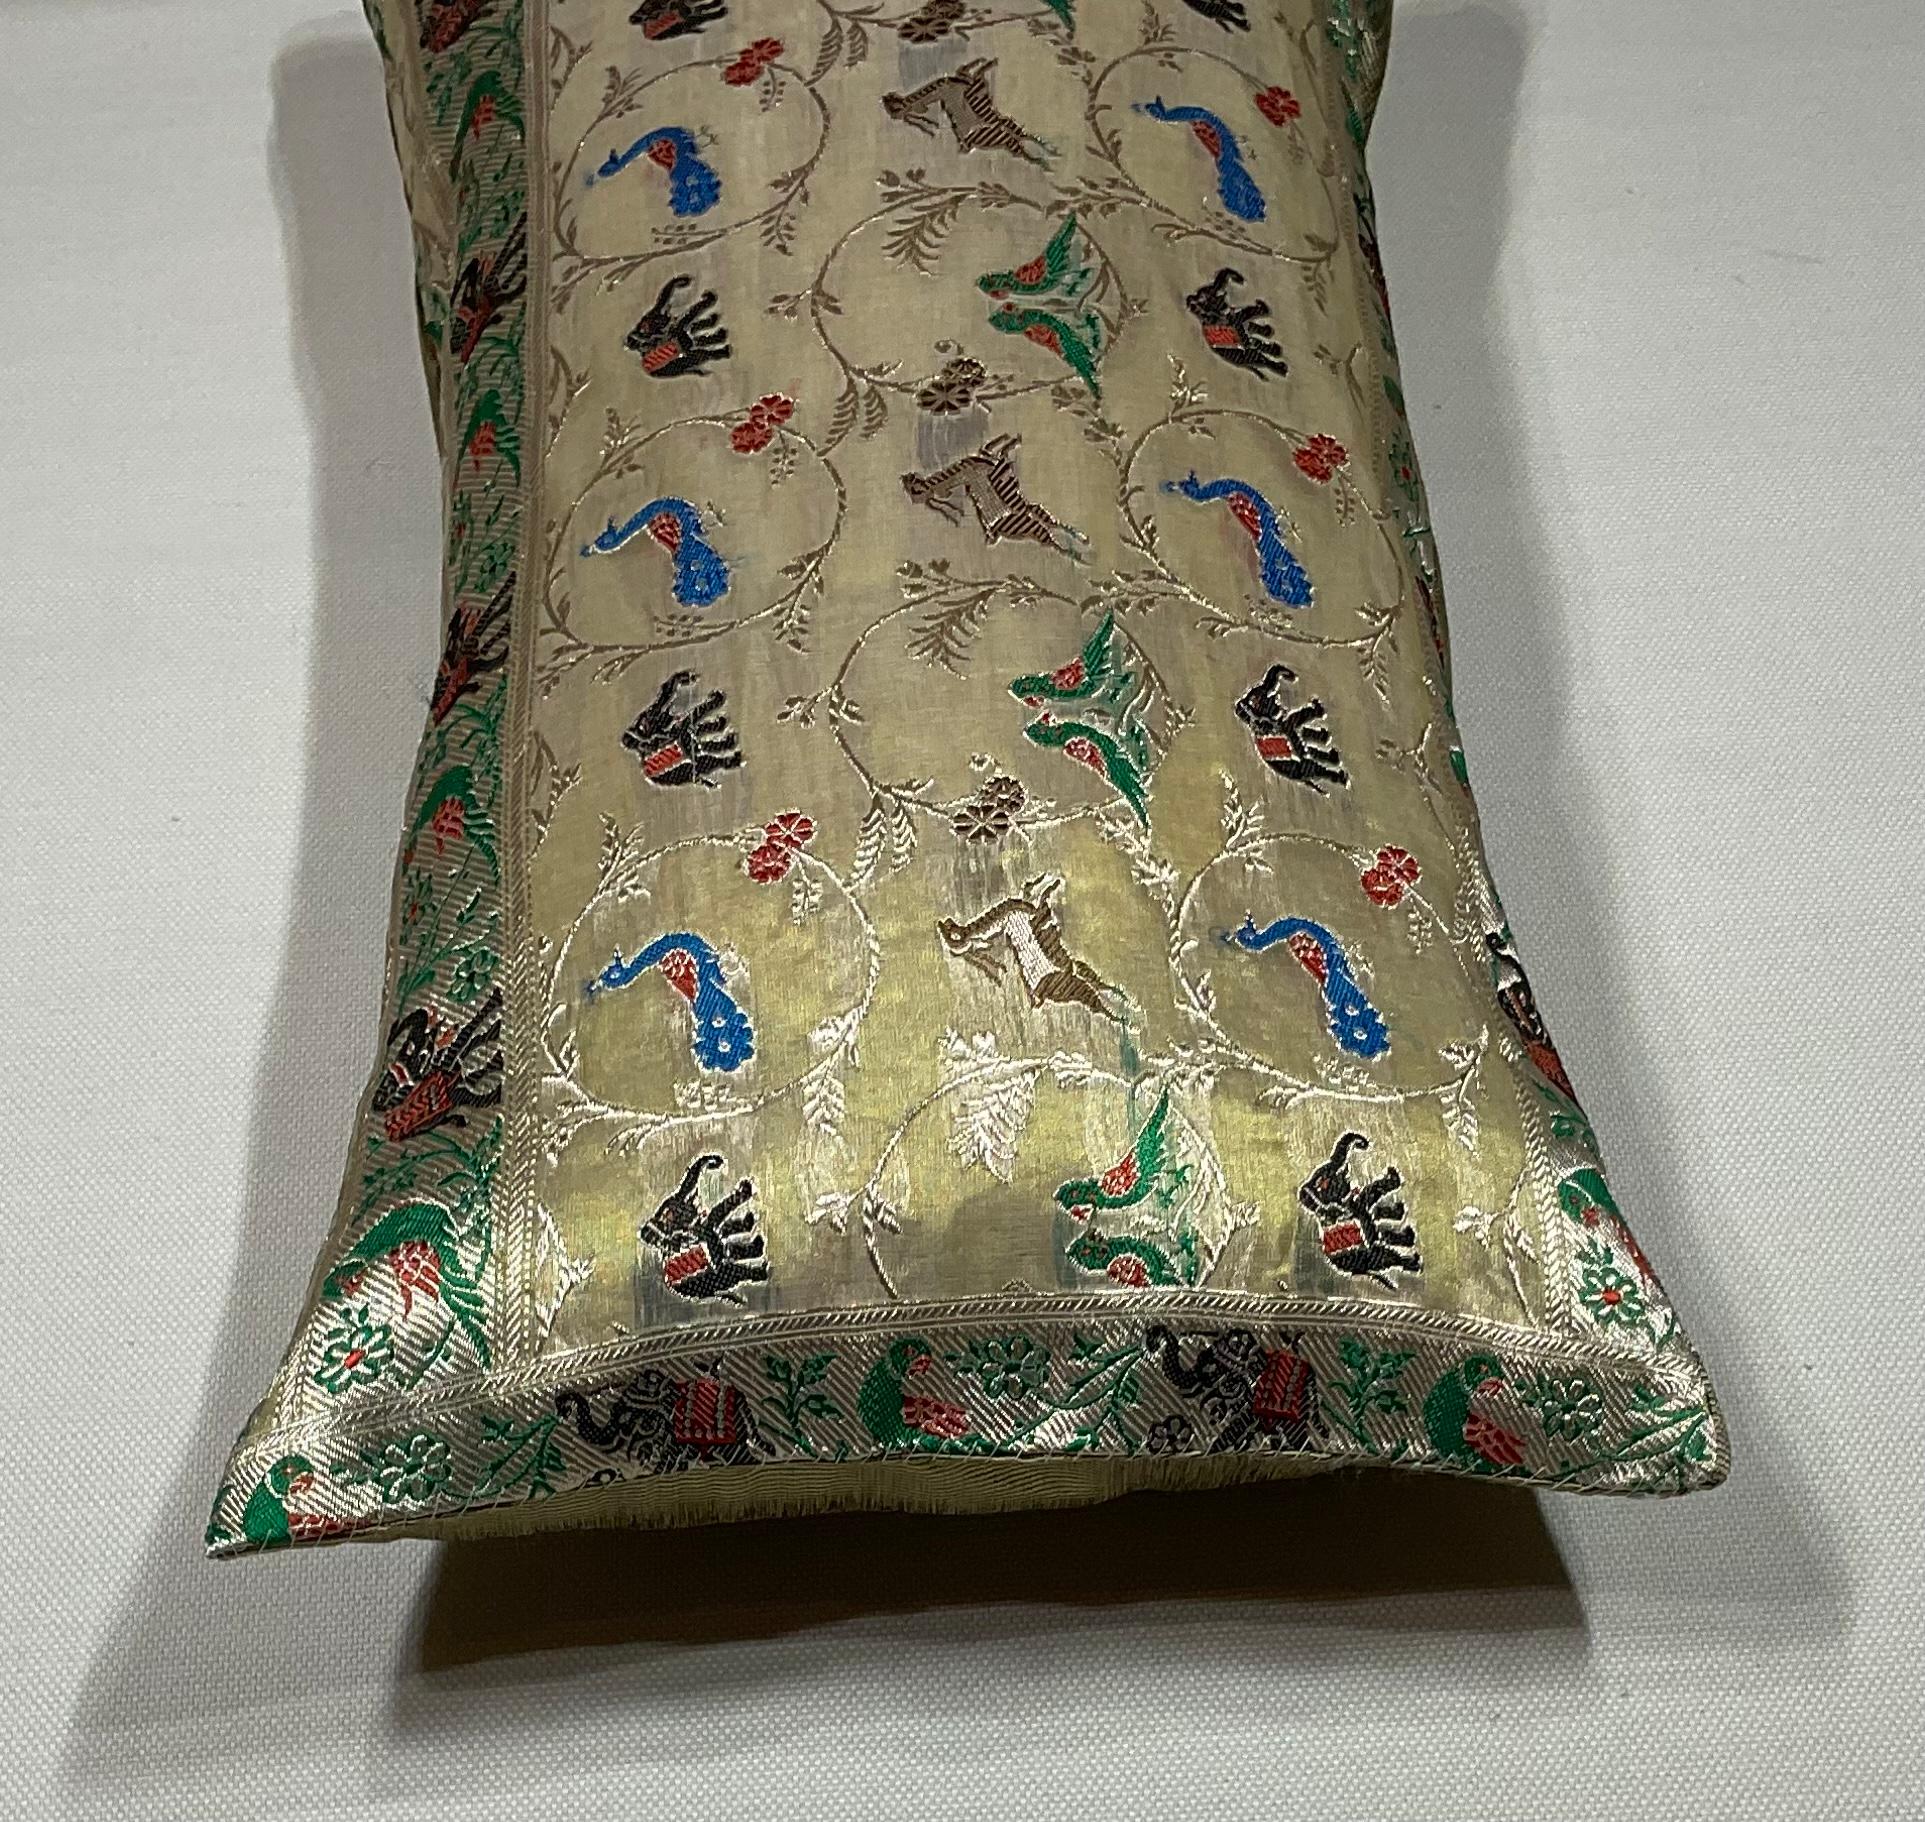 Indian Single Vintage Embroidery Textile Pillow